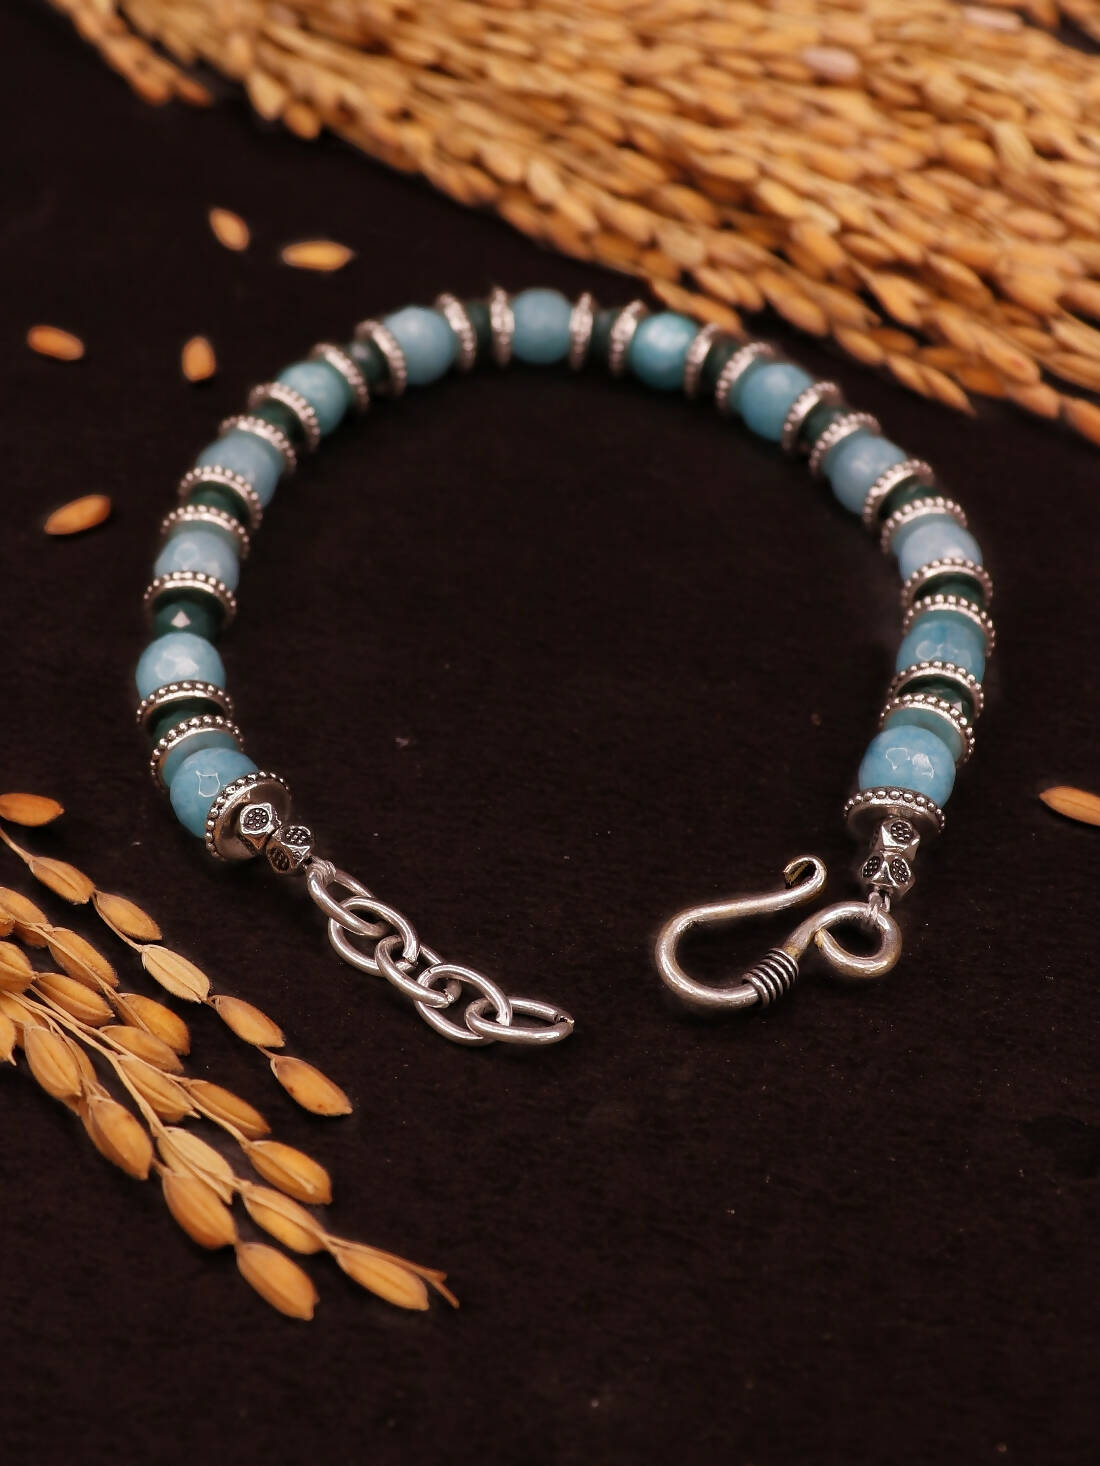 Handmade German silver oxidized silver look alike Office wear Everyday Casual Bracelet with sky Blue onyx and Green Crystal Cut Beads - NAZM